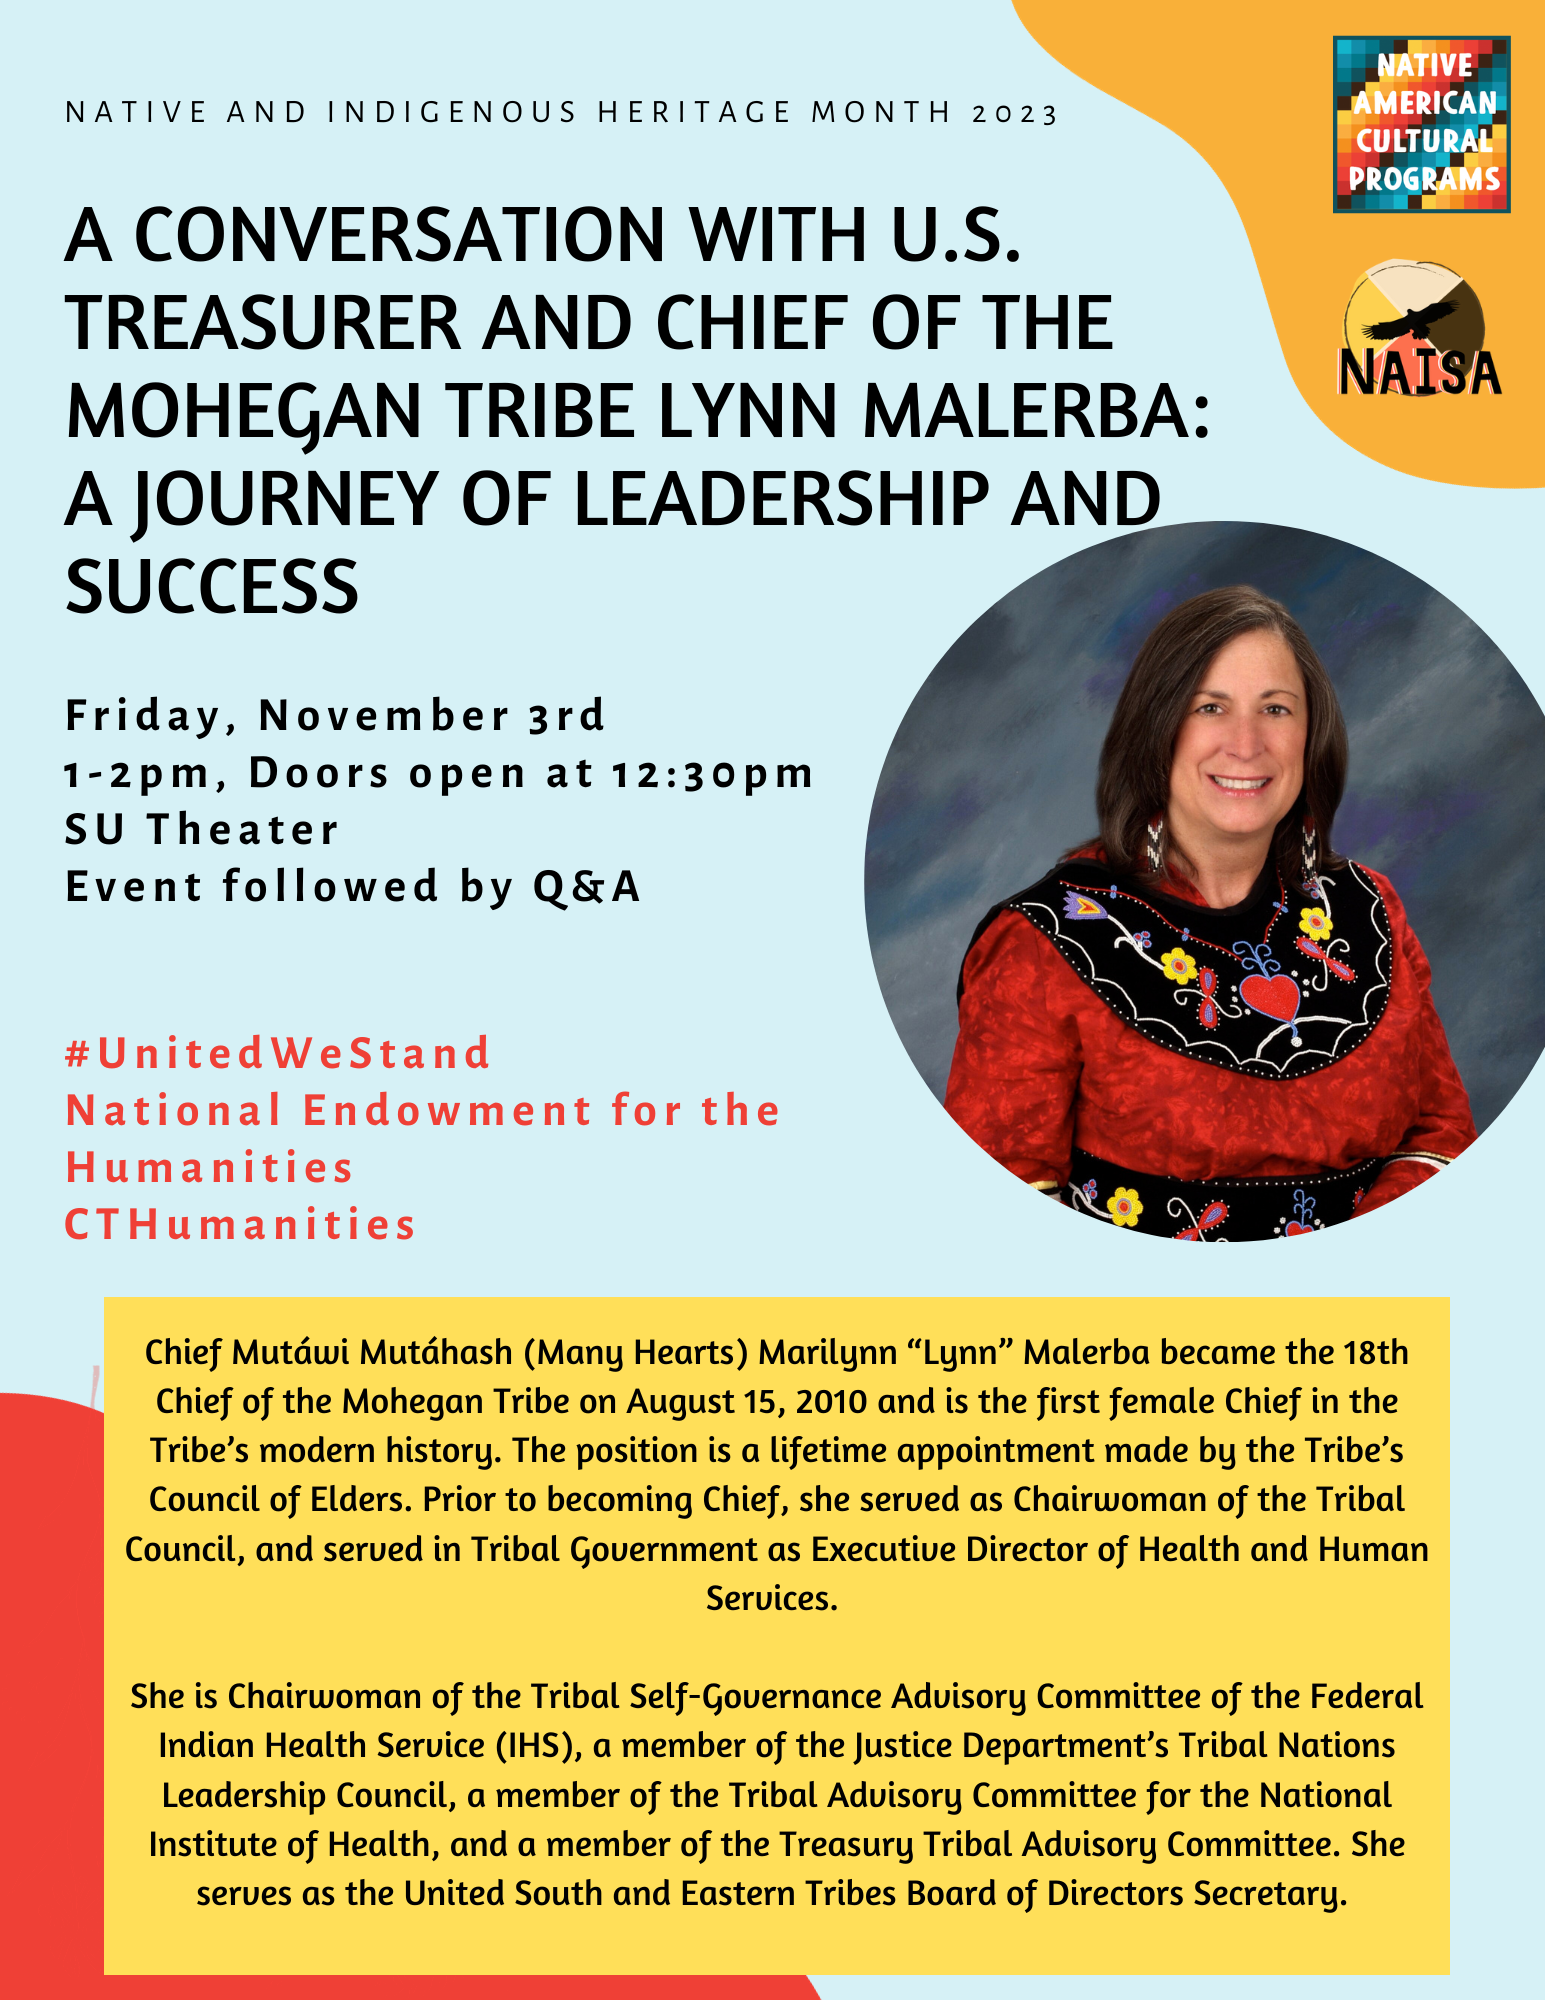 “A Conversation With U.S. Treasurer and Chief of the Mohegan Tribe Lynn Malerba: A Journey of Leadership and Success”